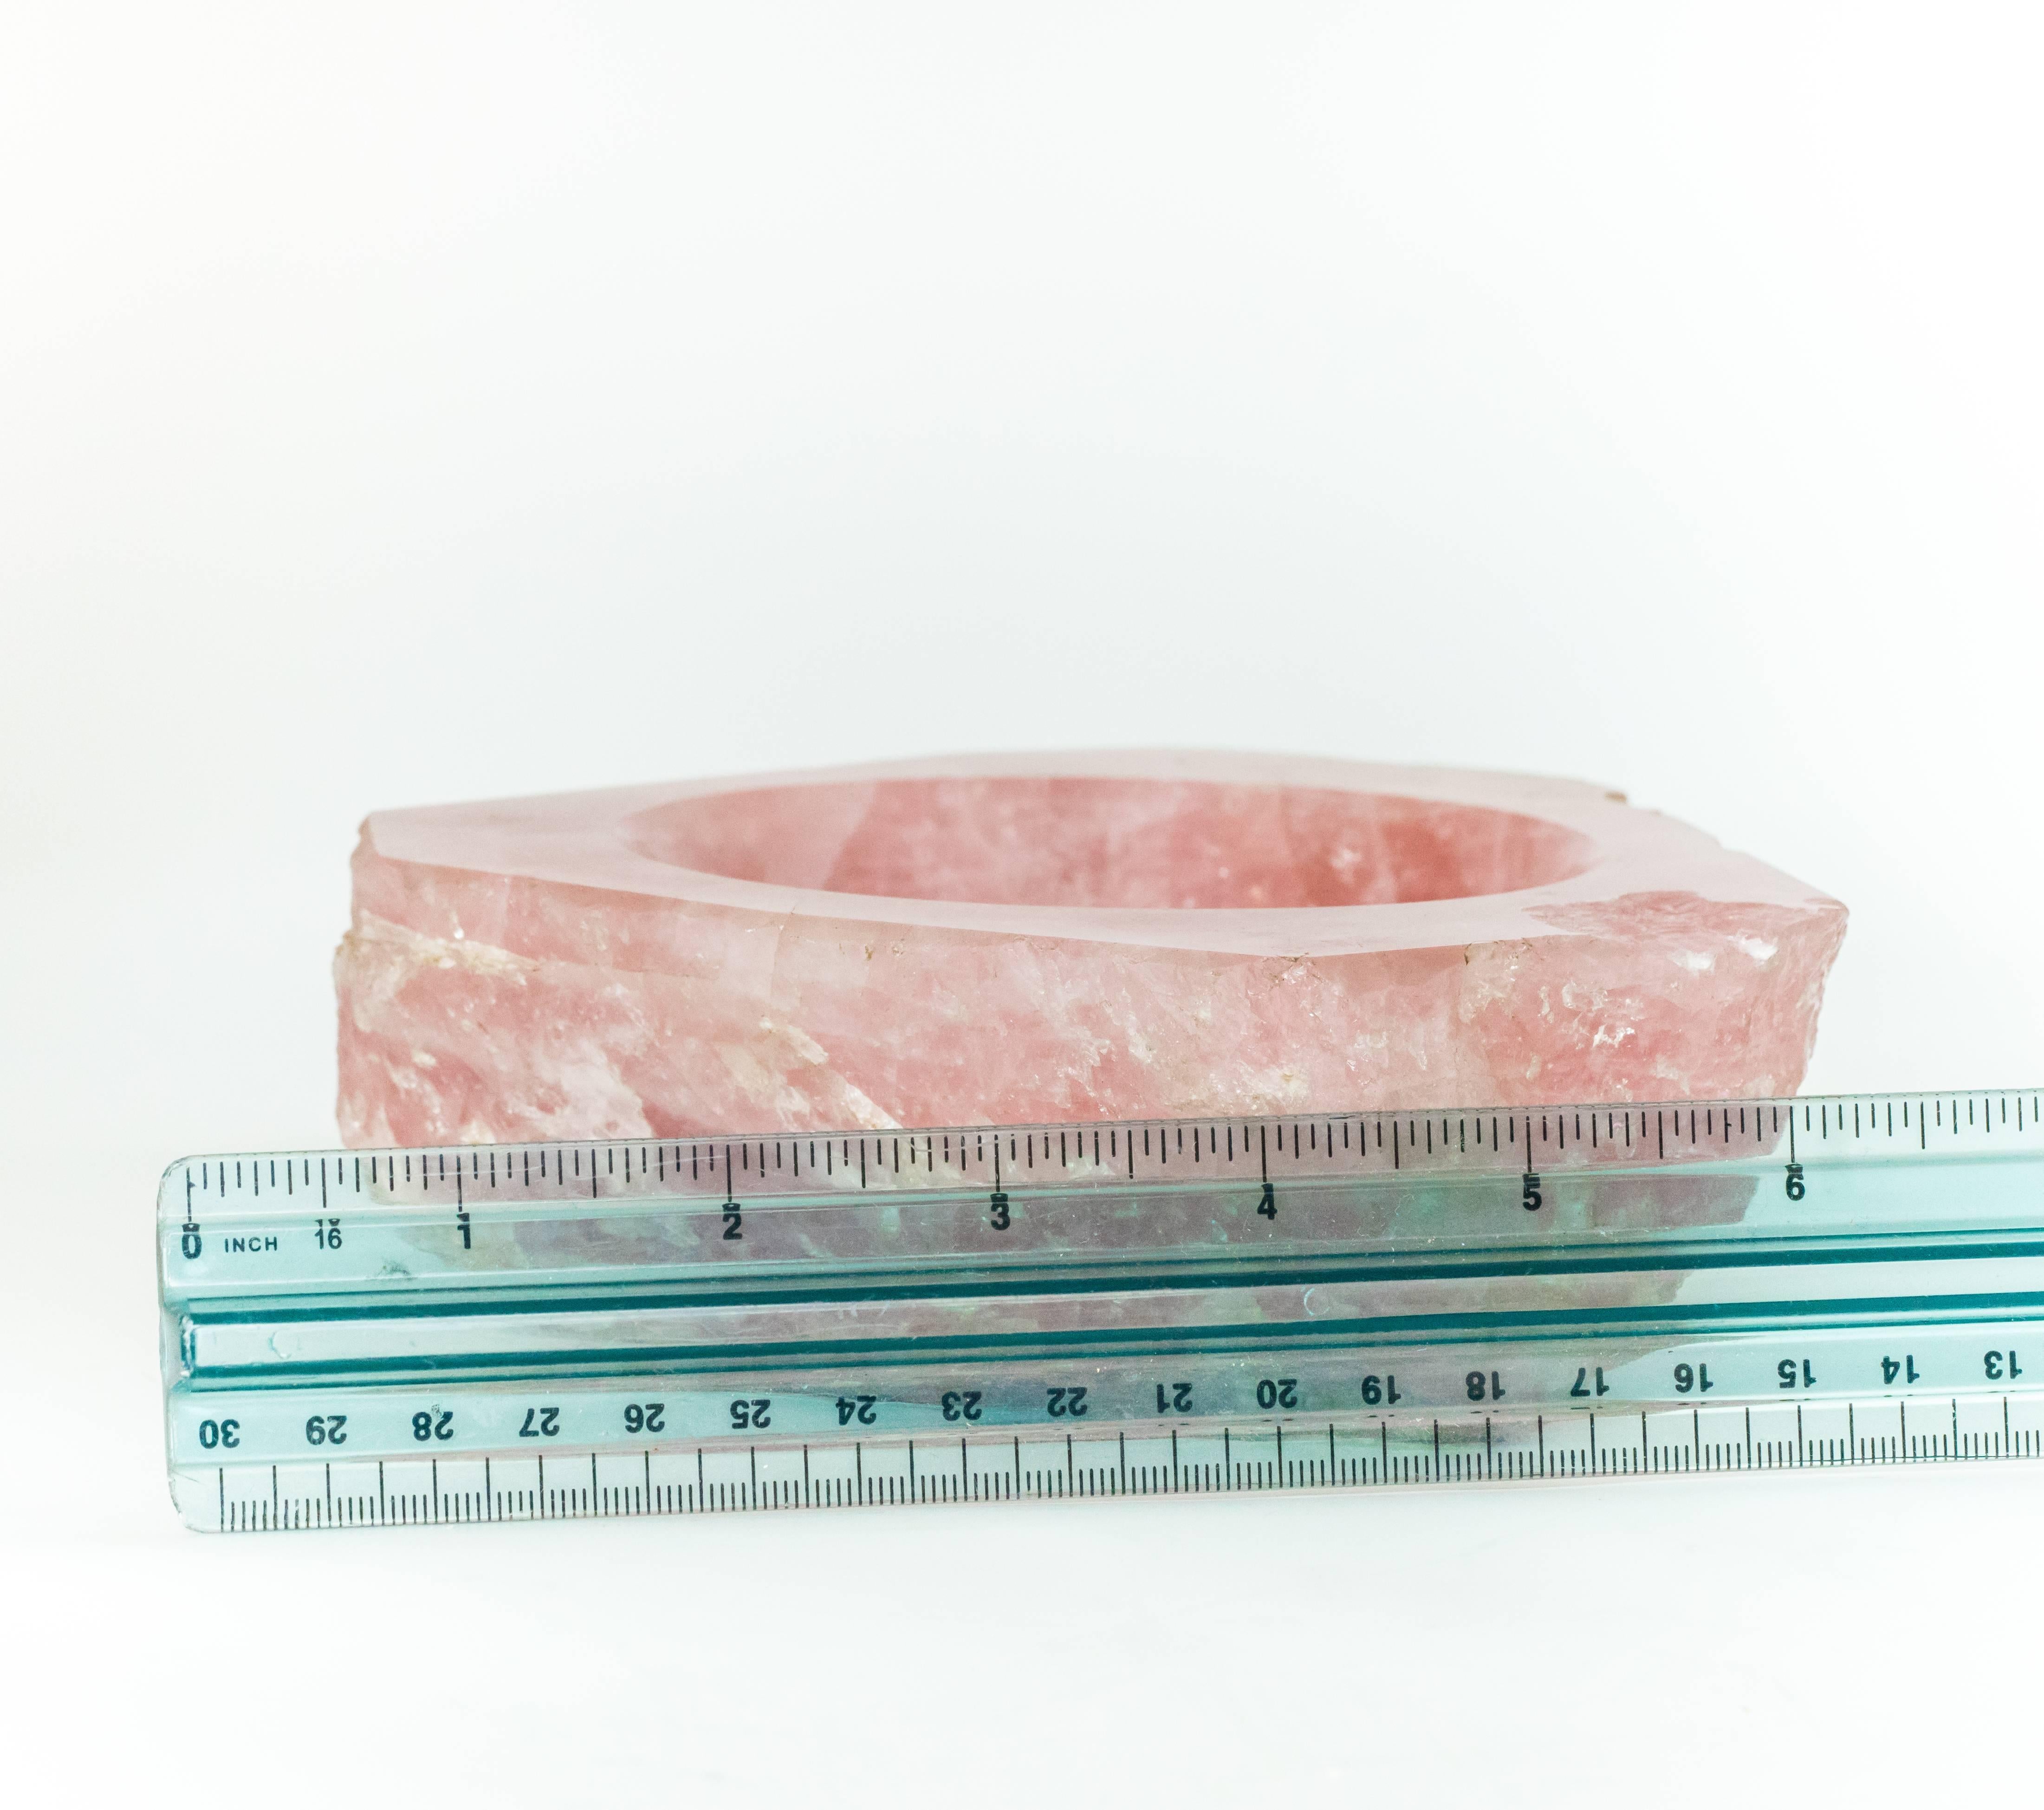 A rare find with only one of five known to exist. This is a rose-colored mineral catch-all paperweight created by Cartier in the 1960s. The base of the paperweight is made of a sterling silver plate. Hallmarks visible here are 